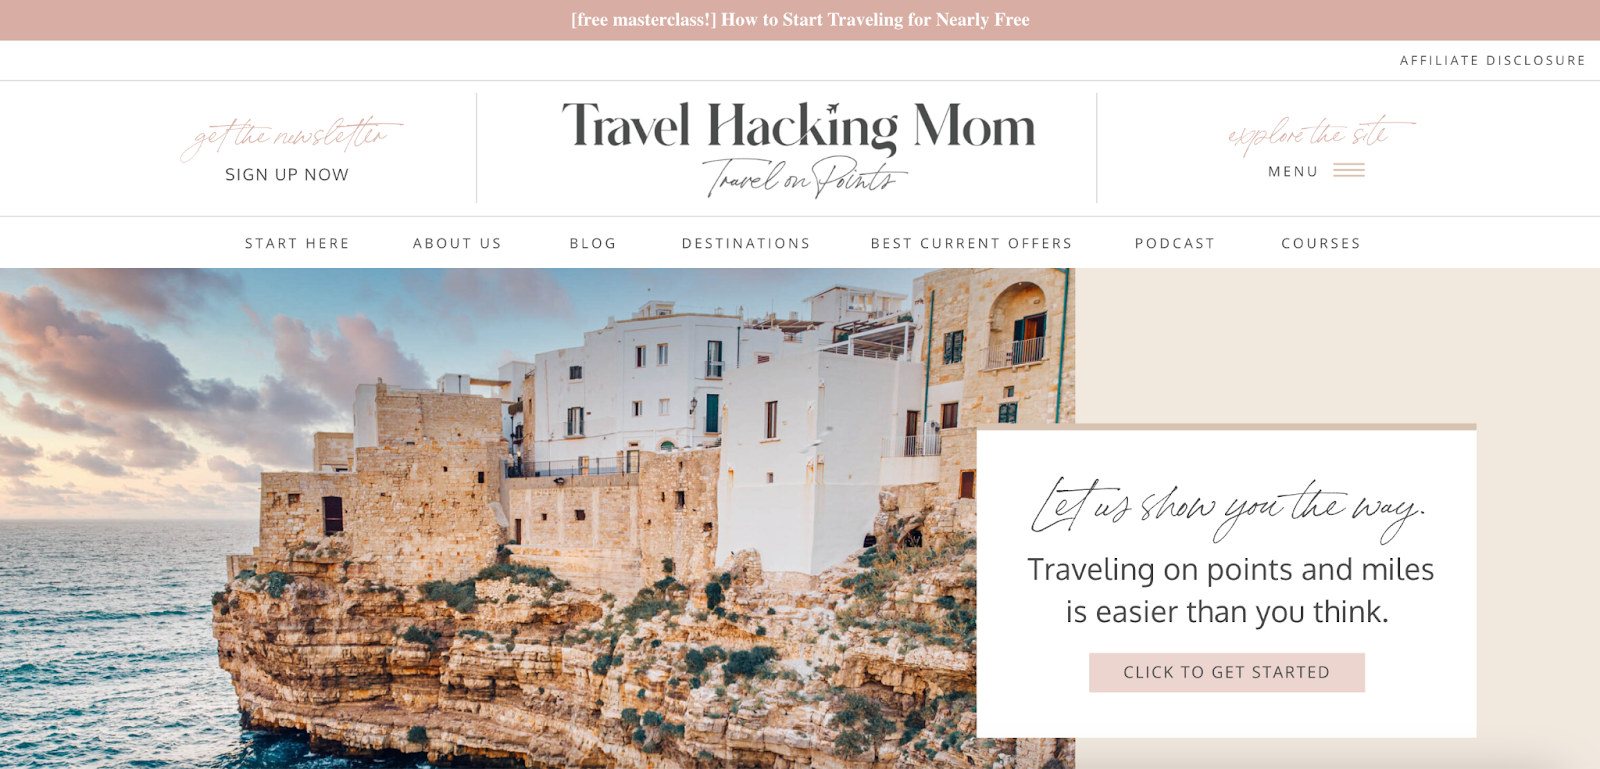 A screenshot of the Travel Hacking Mom website homepage